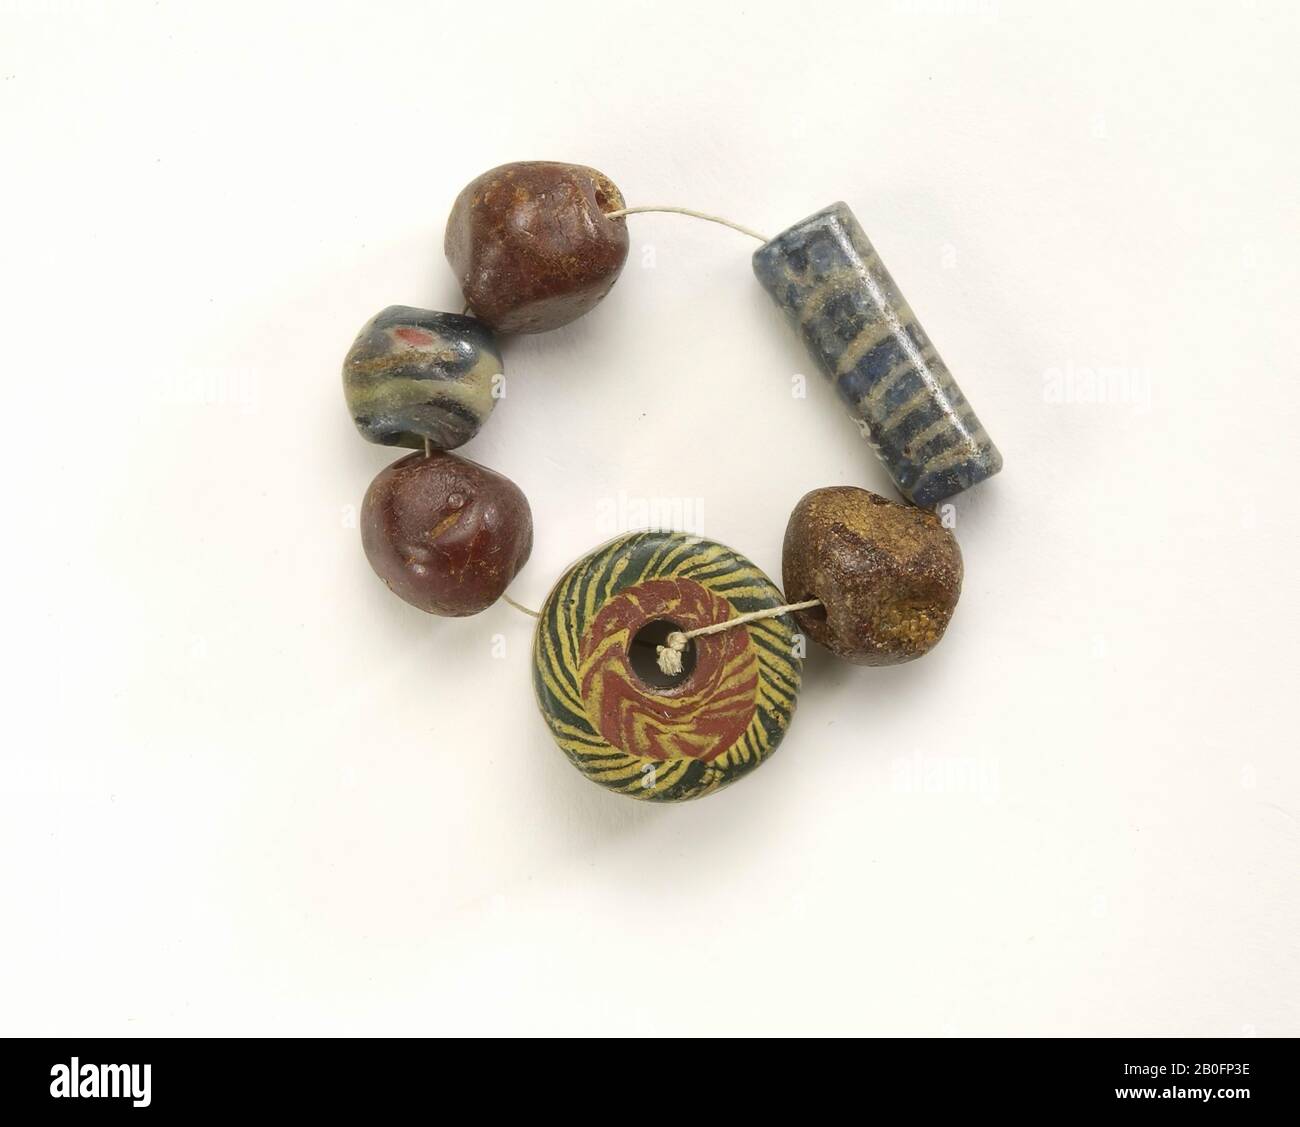 1: 1 bead of translucent blue glass with white spiral. H: 2.5 D: 0.9 2: 3 cubic amber beads. H: 1,3 D: 1,5 3: 1 cylindrical bead of rolled bands millefioriglas. H: 1.3 D: 2.2 4: 1 round millefiori beads. H: (supplement), bracelet, beads, glass, organic, amber, height: 2.5 cm, vmeb 400-600, Netherlands, Utrecht, Rhenen, Rhenen, grave 601 Stock Photo